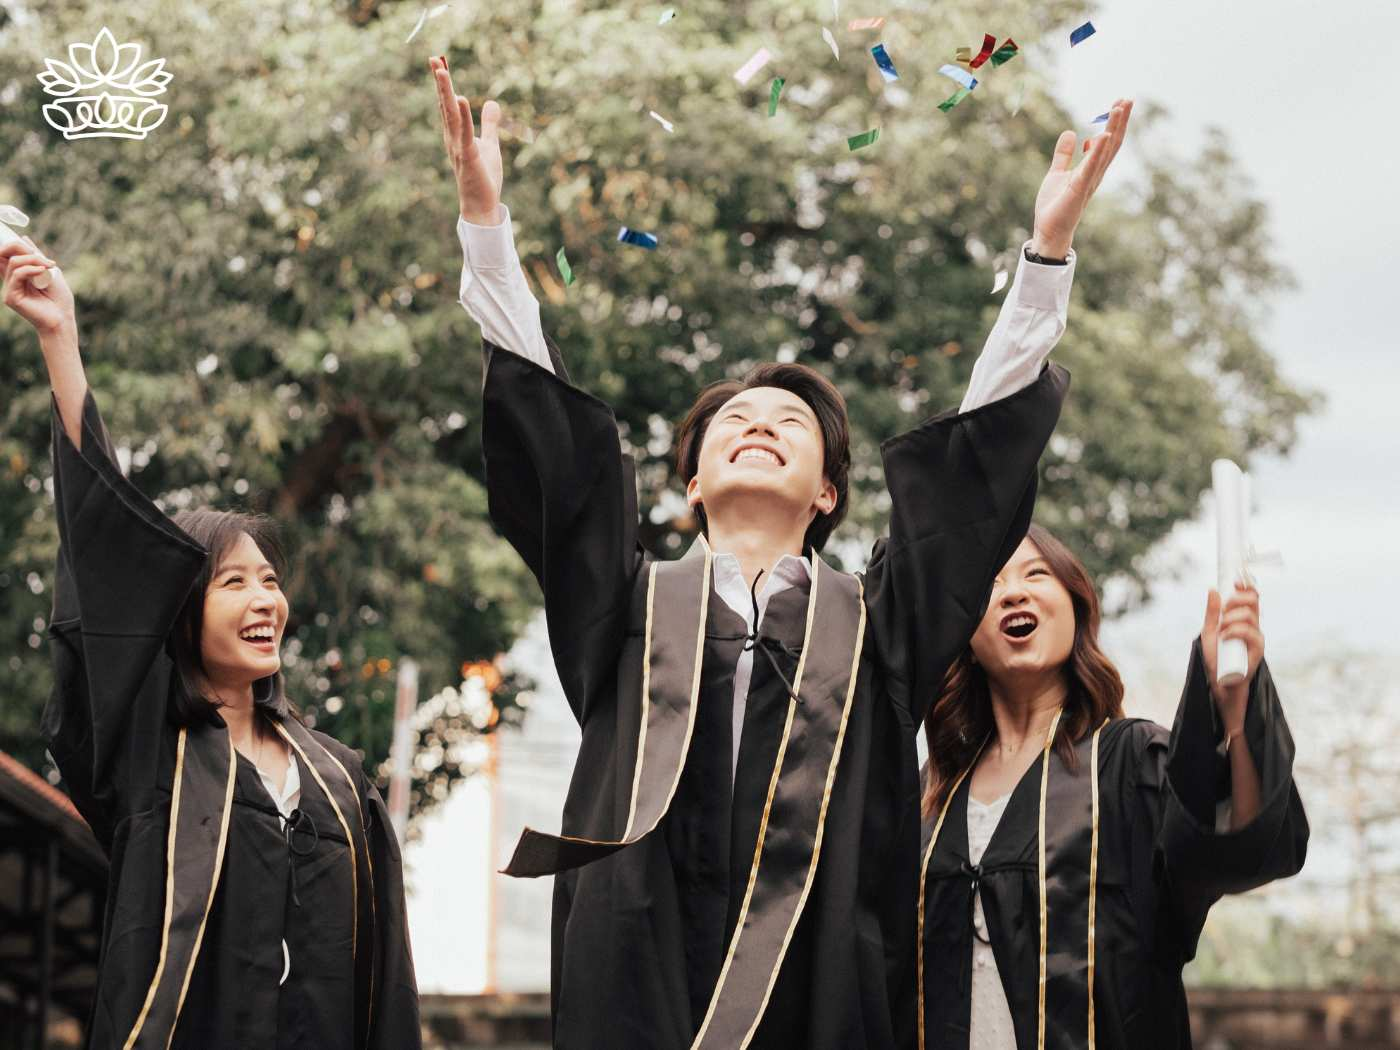 A group of three jubilant graduates, two women and one man, throwing their caps in the air during a festive graduation ceremony, celebrating their achievements with joy and excitement, courtesy of Fabulous Flowers and Gifts.